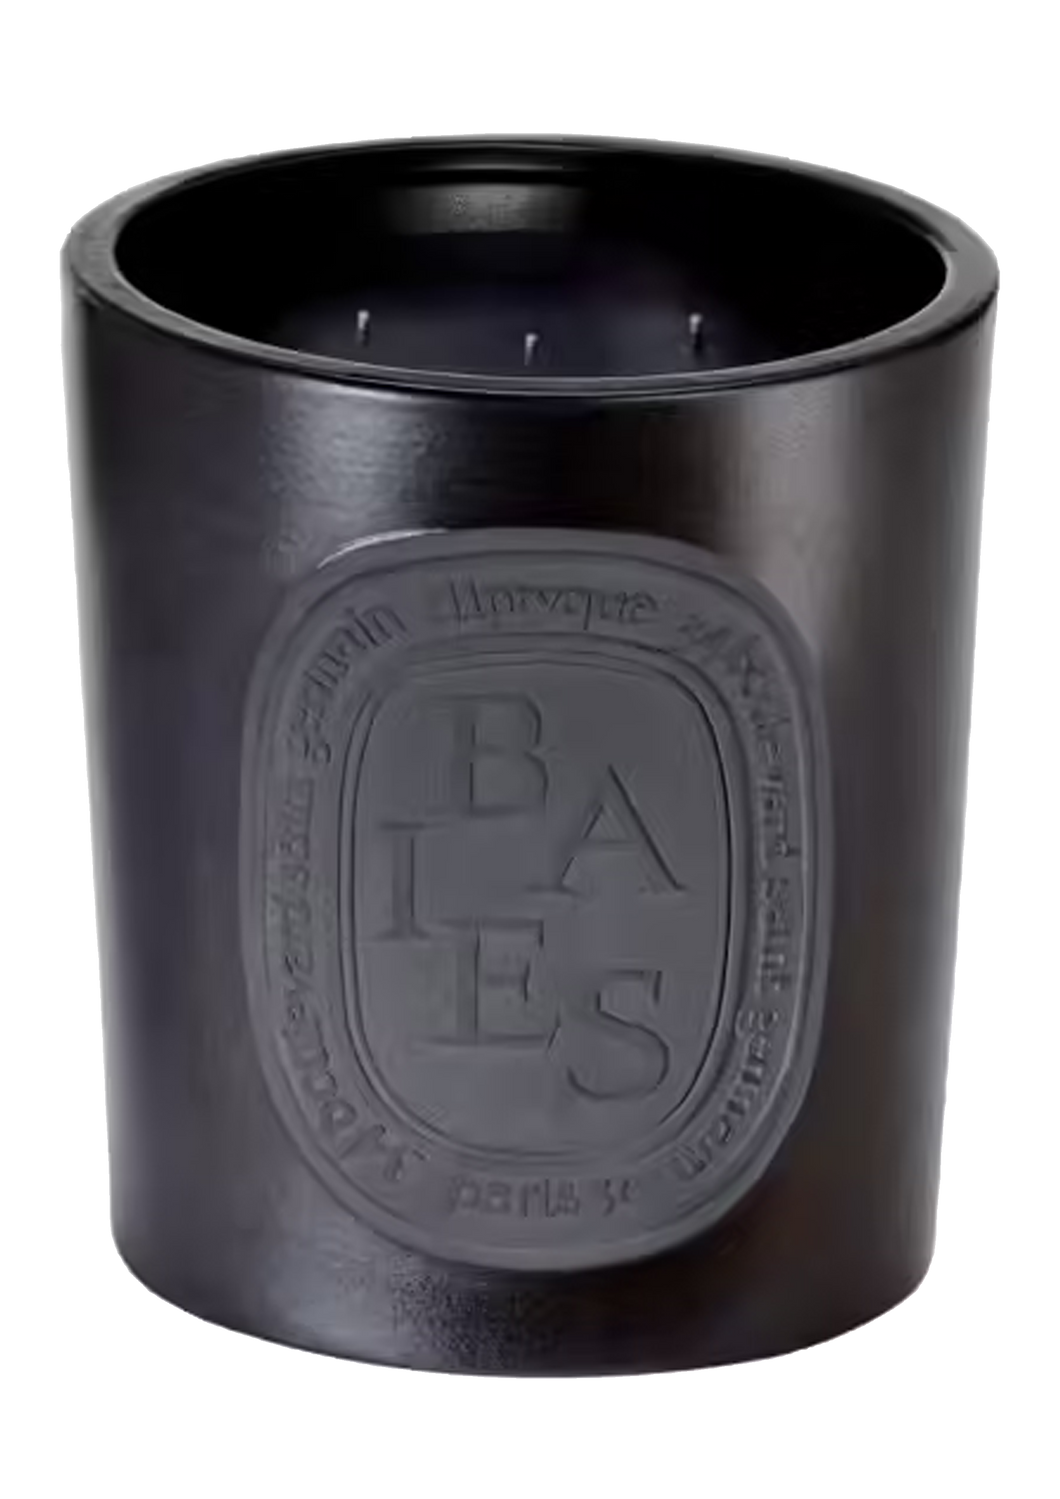 Diptyque Giant Baies Candle, 1500g